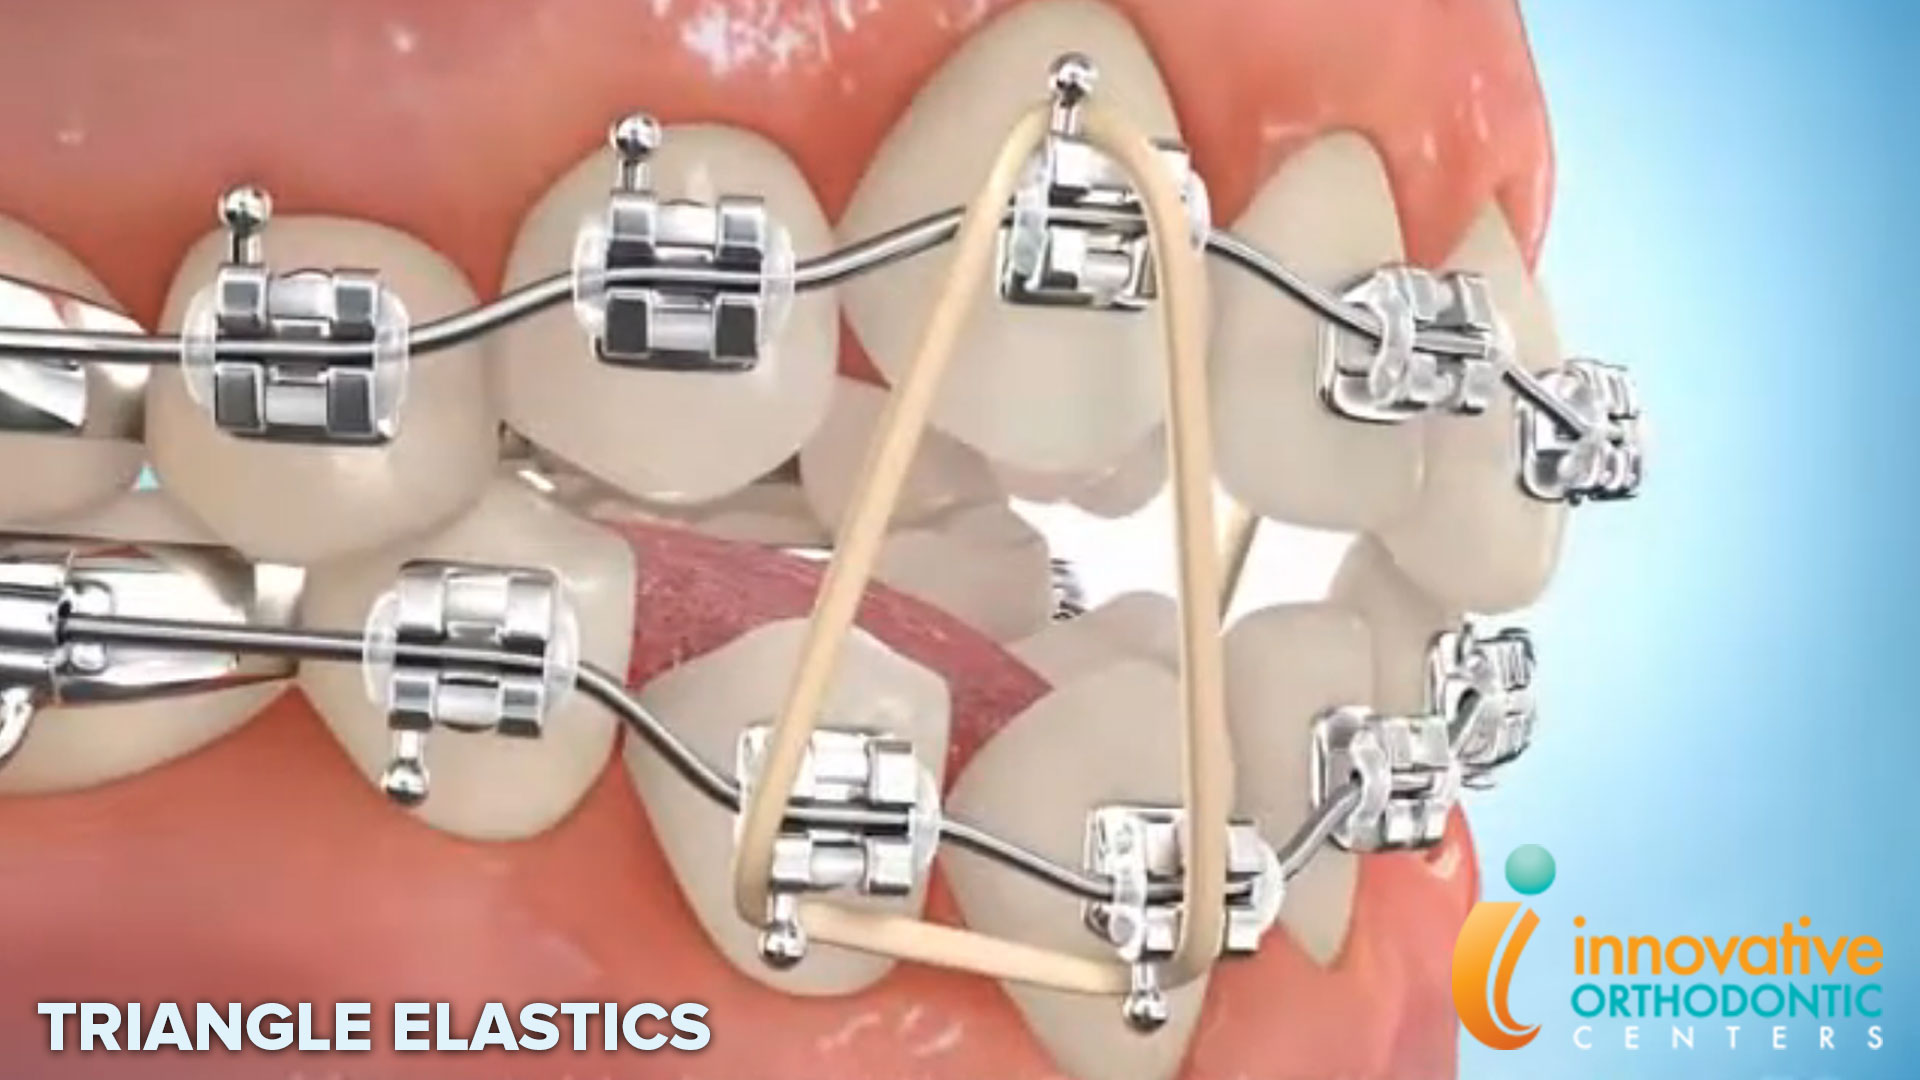 Parts of Braces  Innovative Orthodontic Centers